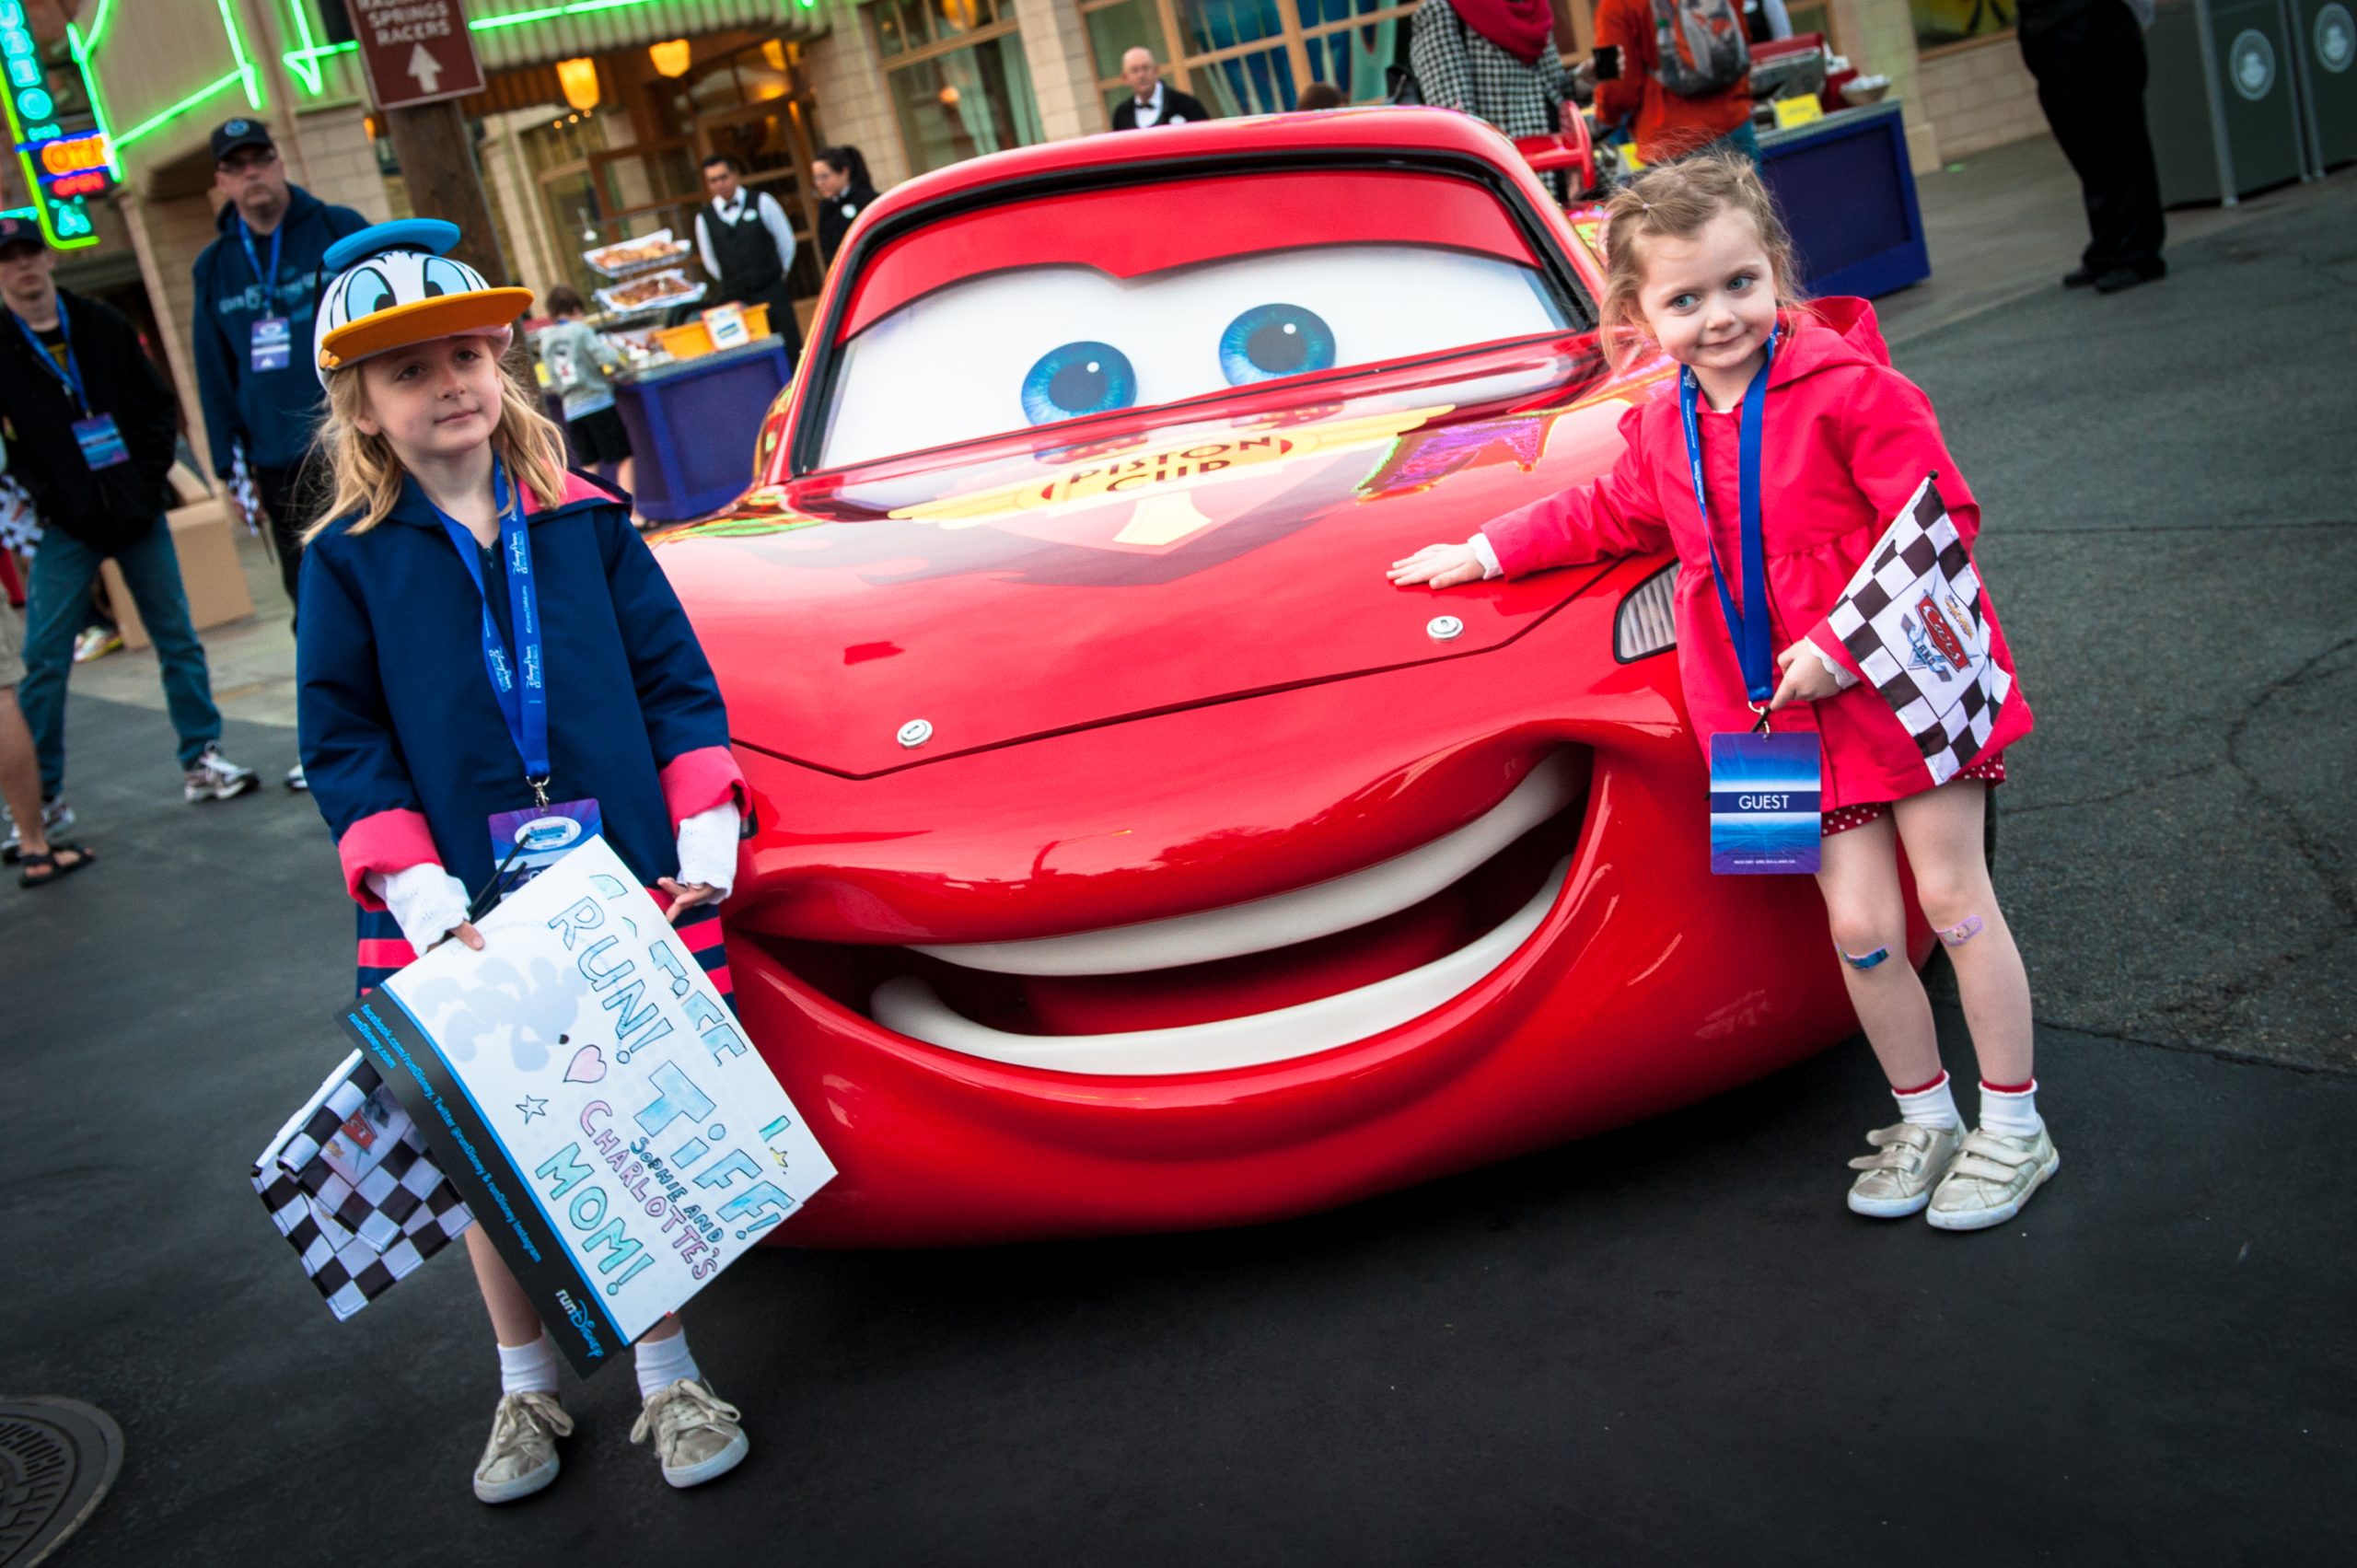 Two young girls stand next to a replica of Lightning McQueen, the race car.